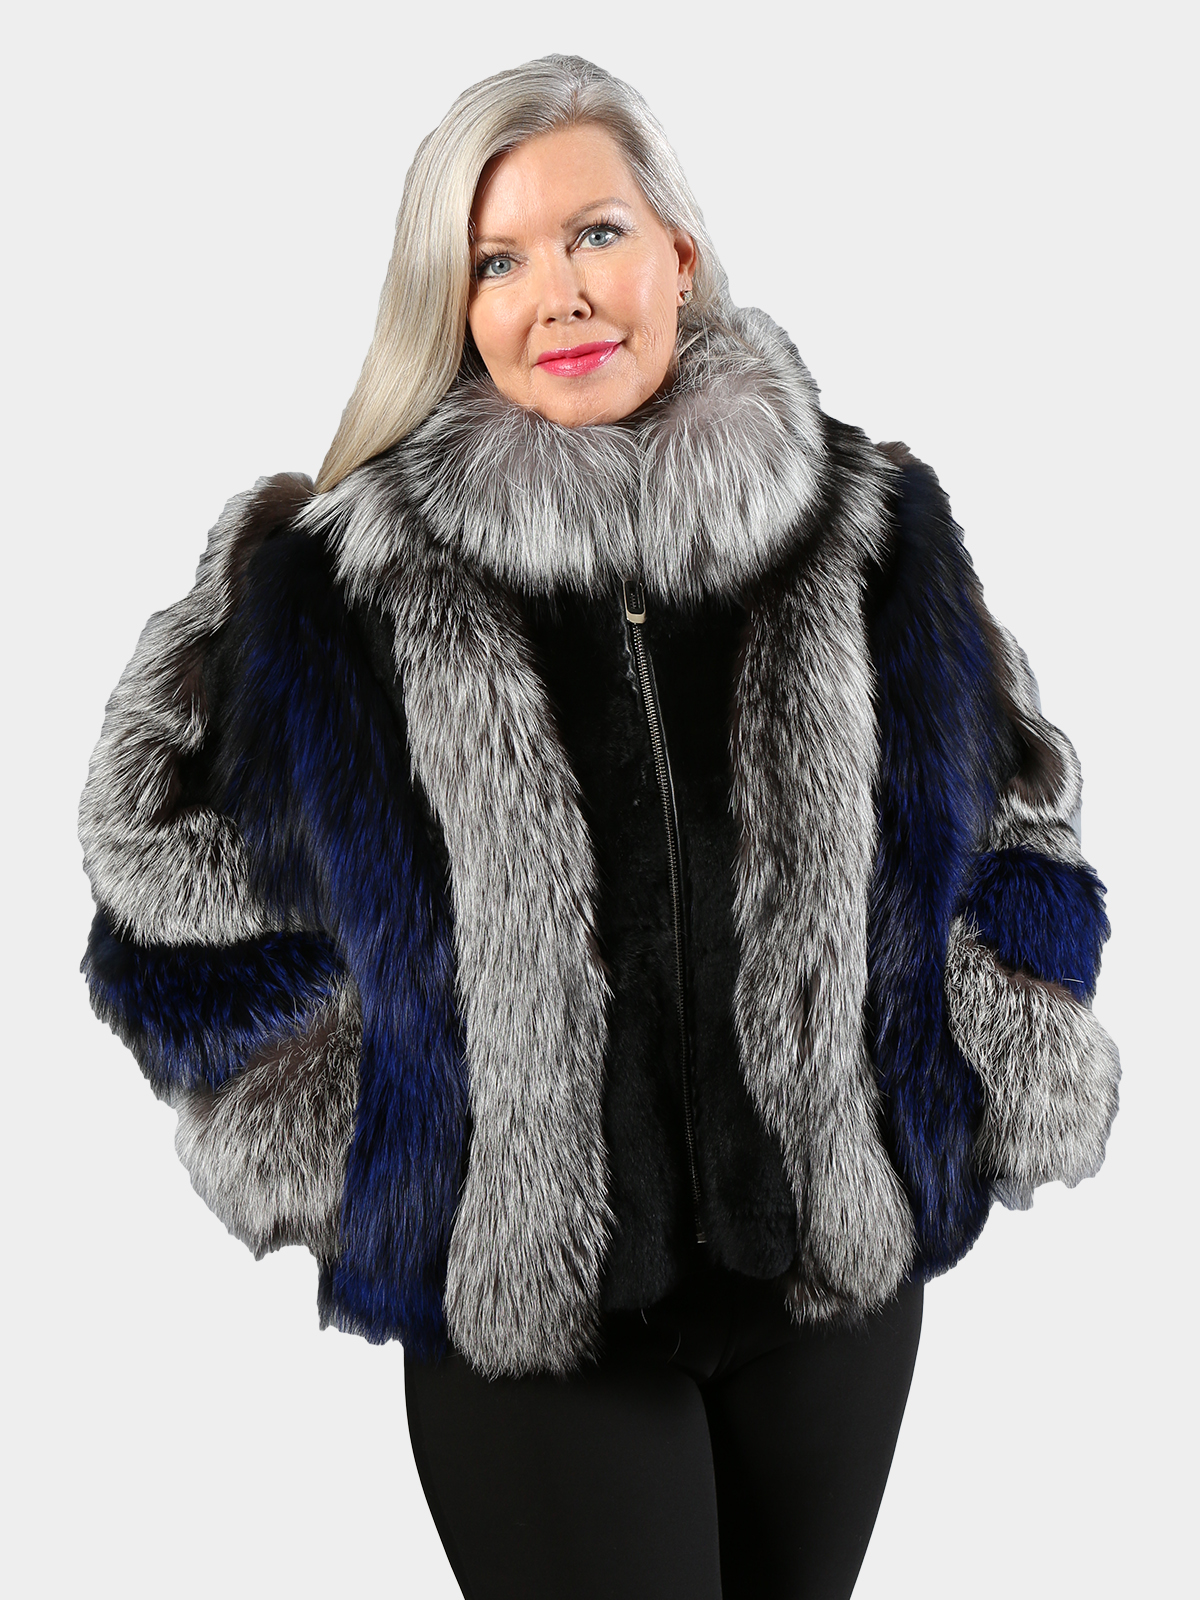 Women's Natural Silver Fox and Royal Blue Fox Fur Jacket - Day Furs